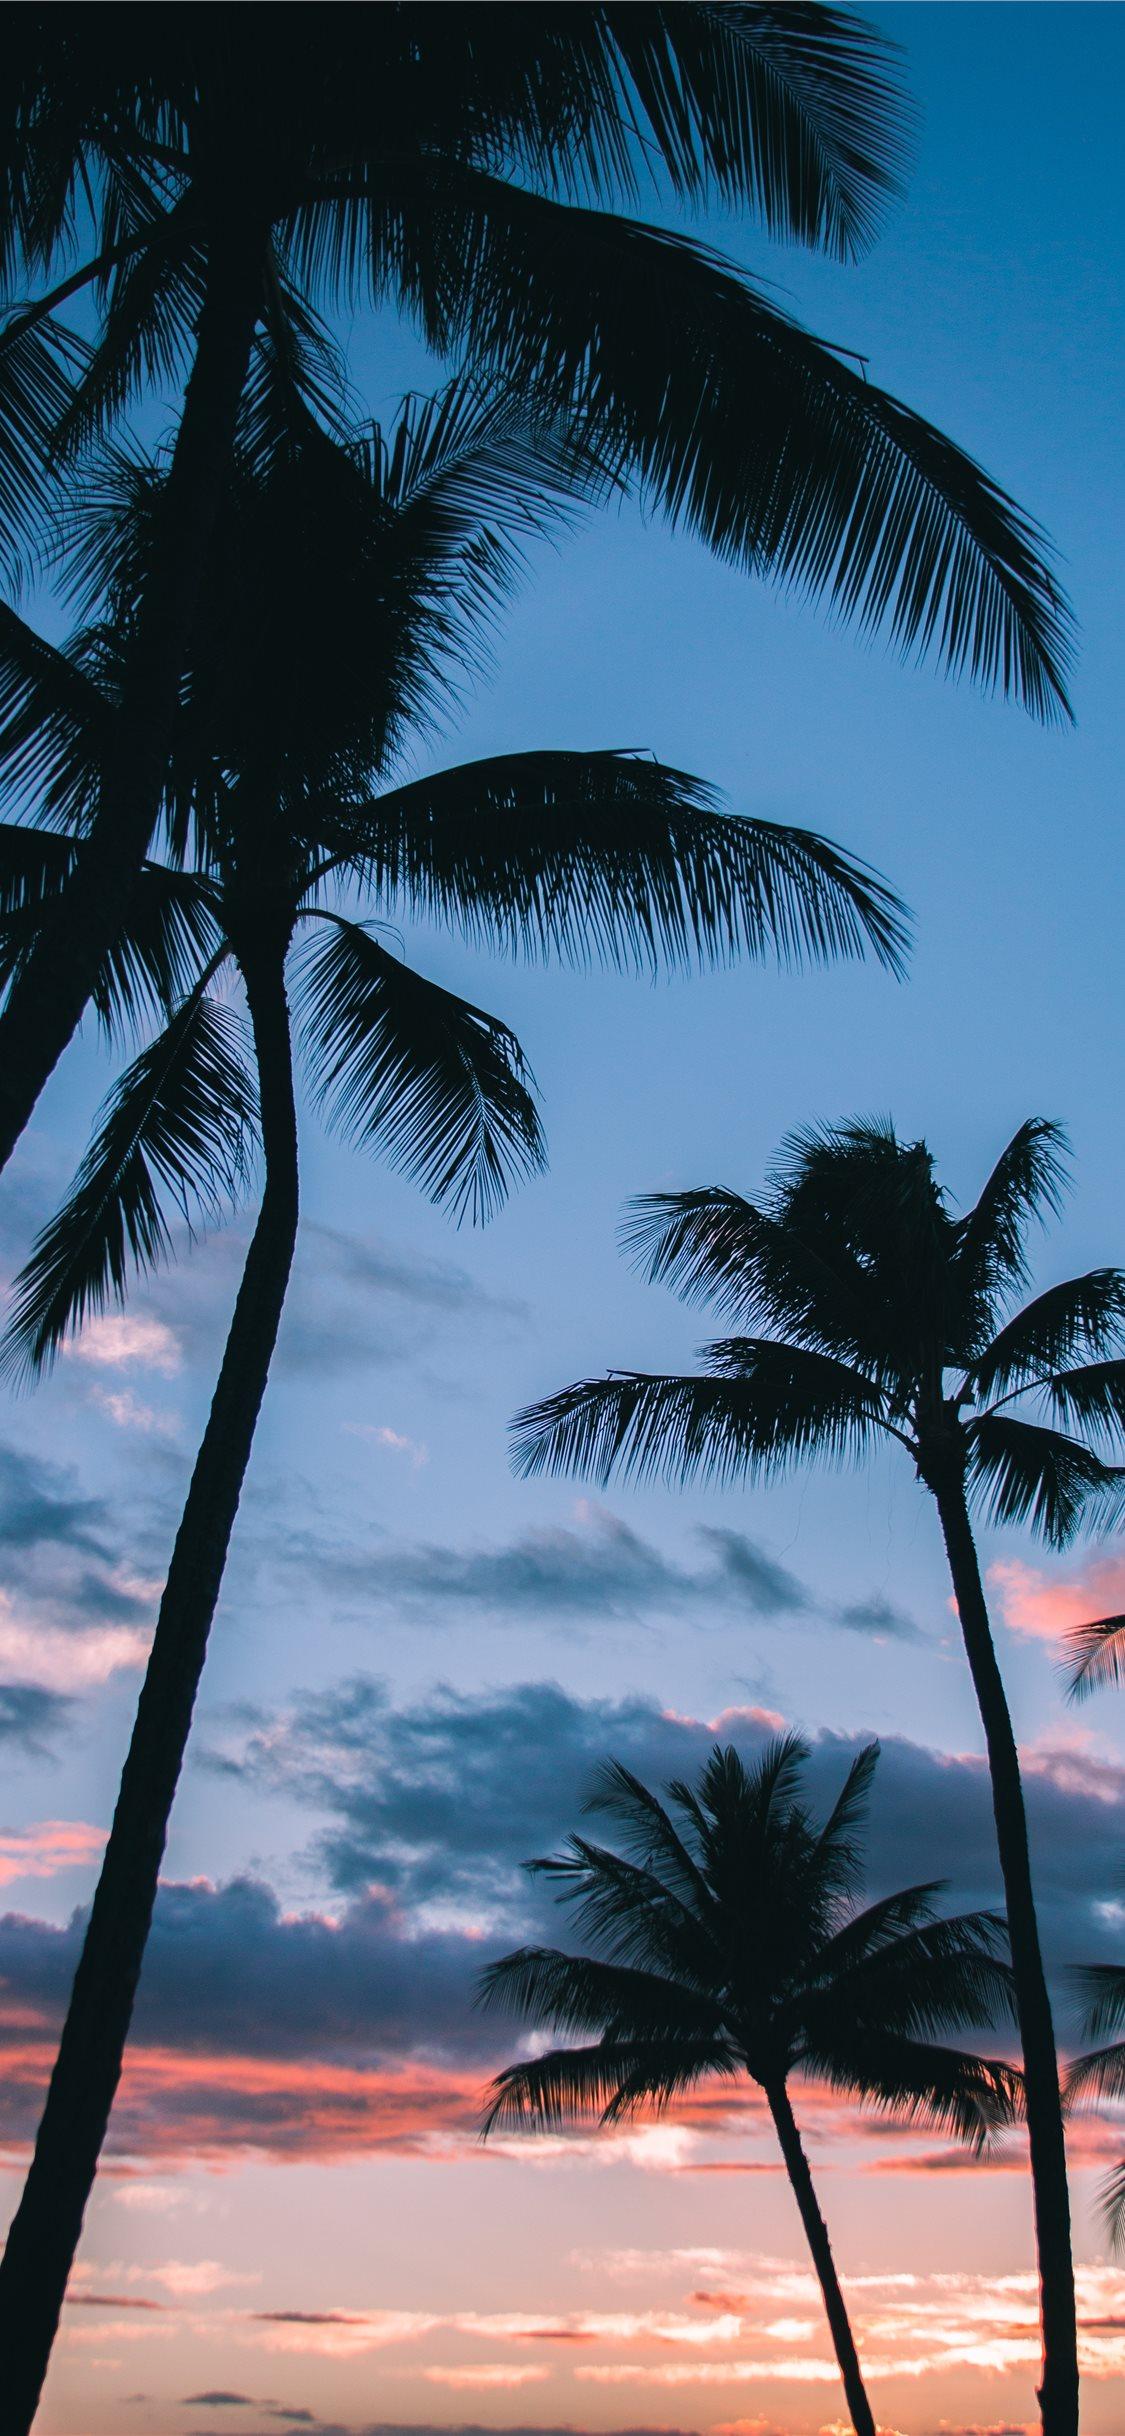 Palm Trees in Paradise iPhone 8 Wallpaper Download. iPhone